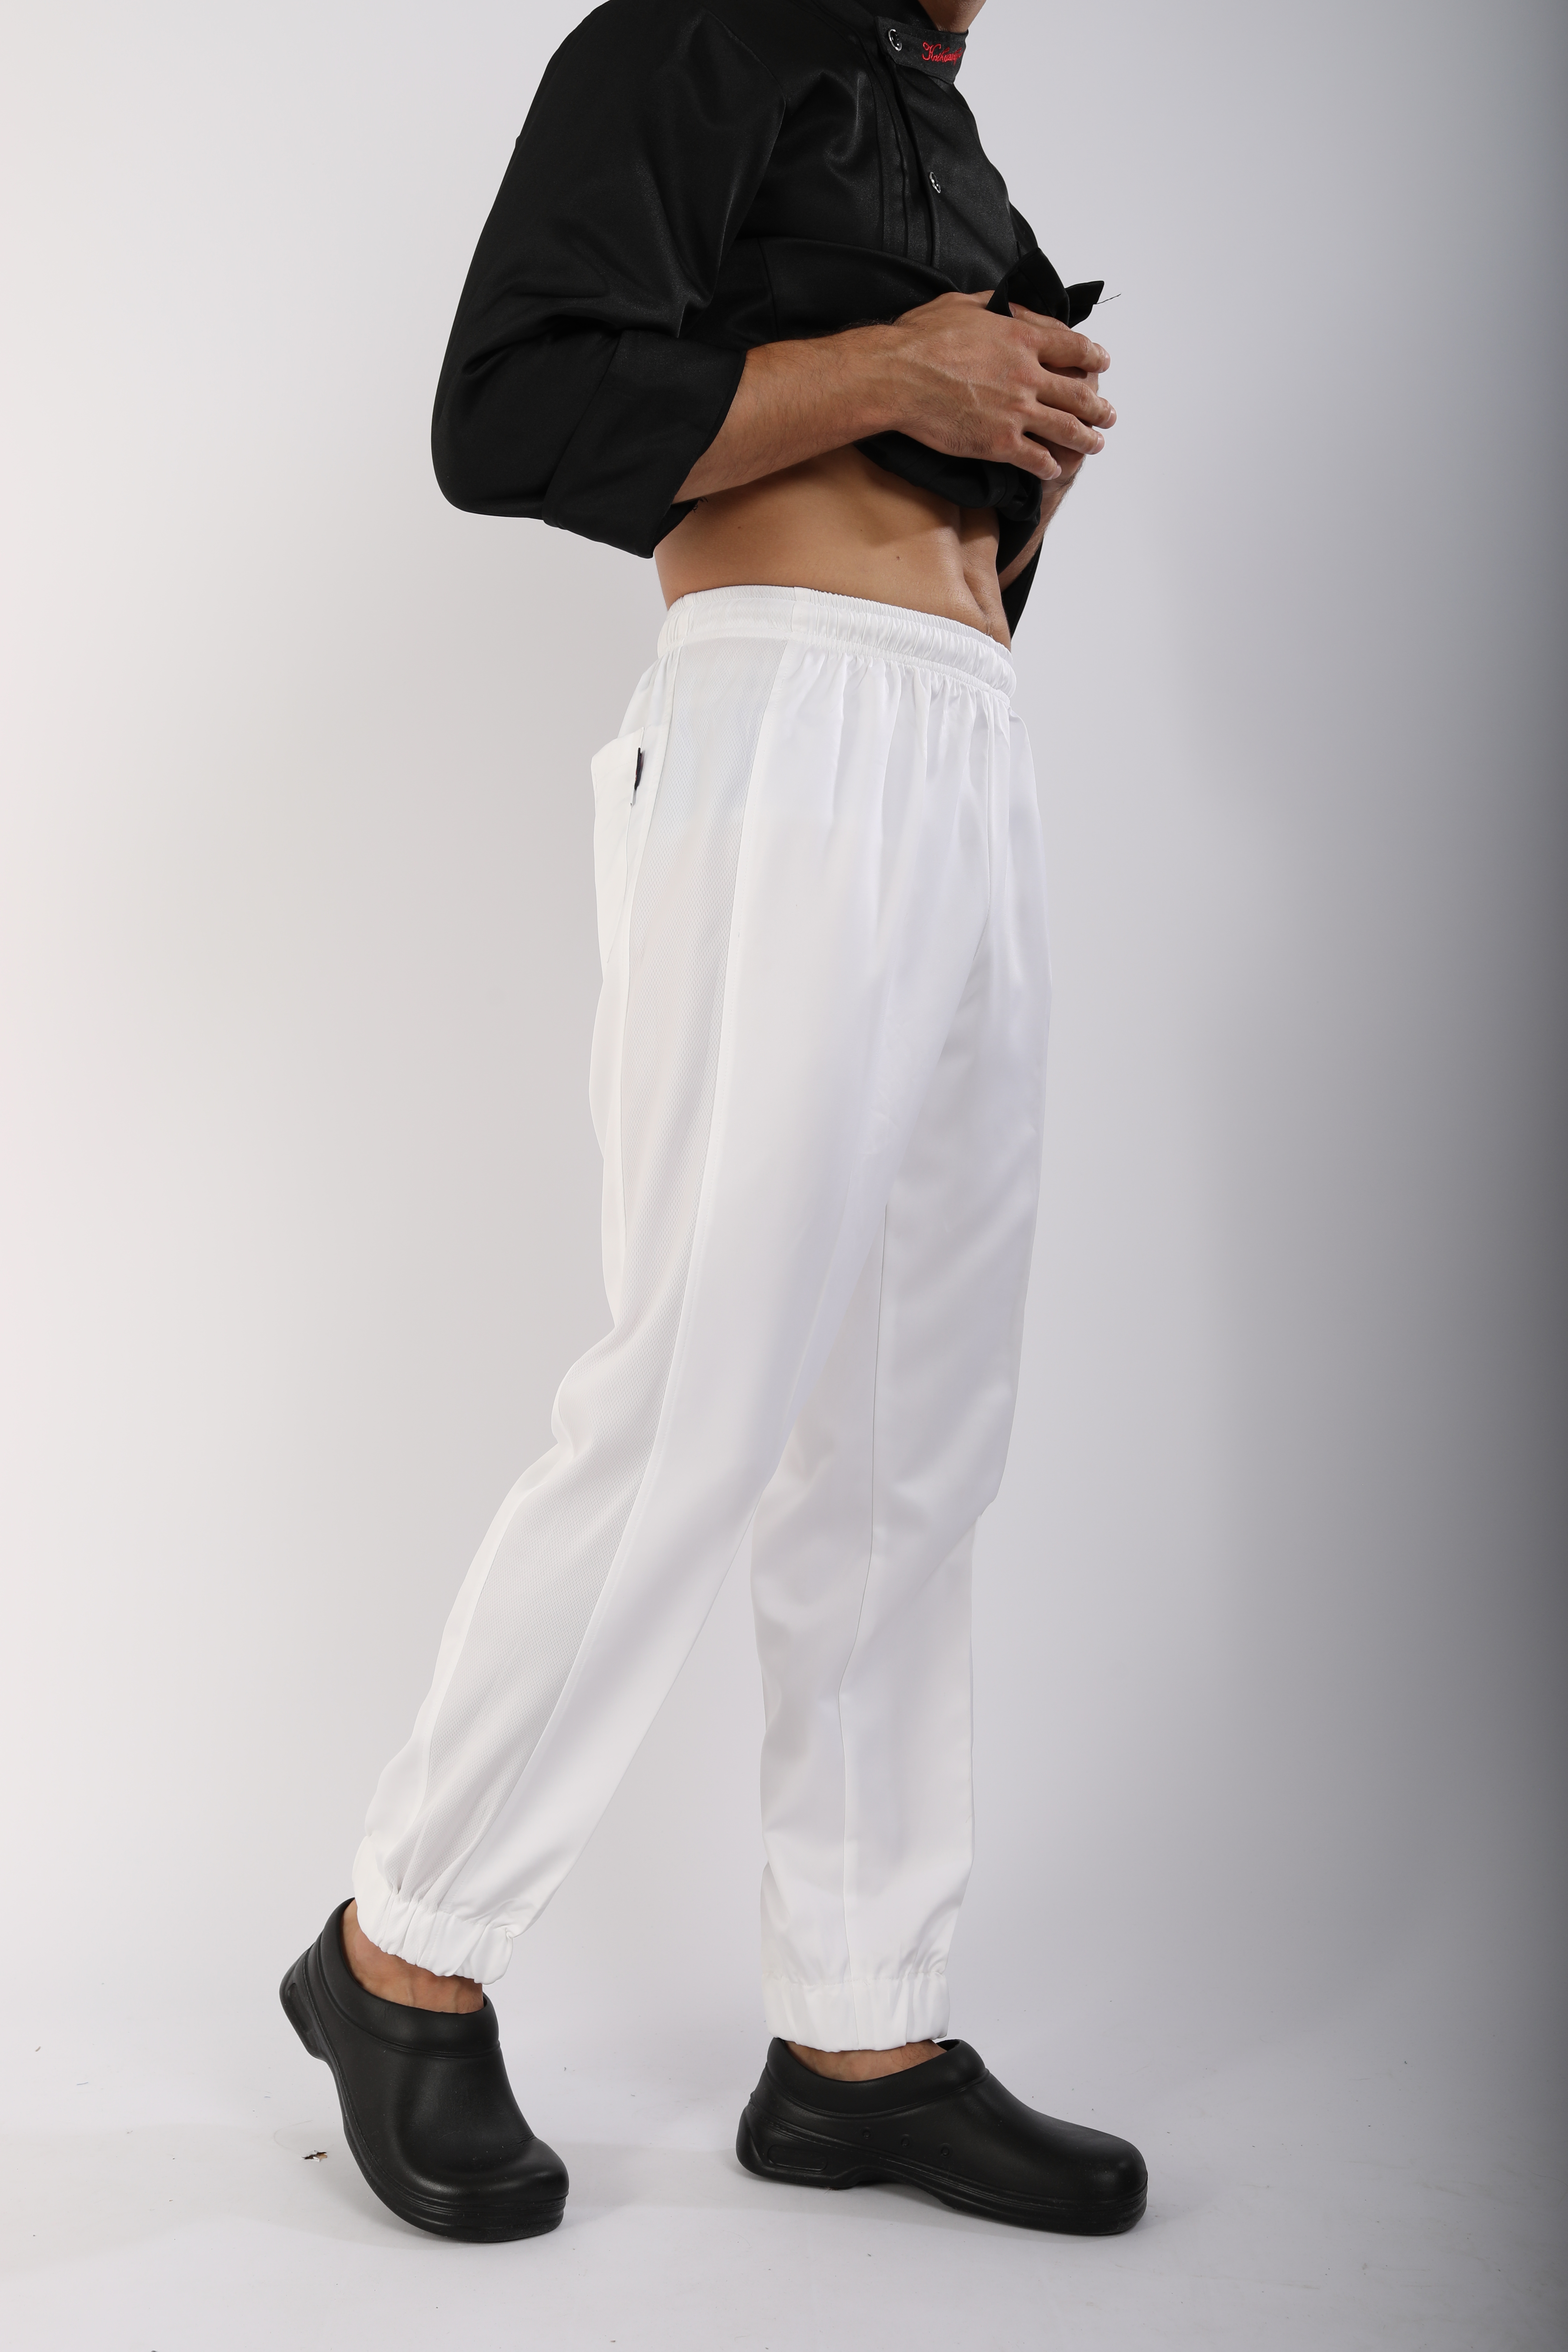 Chef Trousers LG-ZHCW-1001